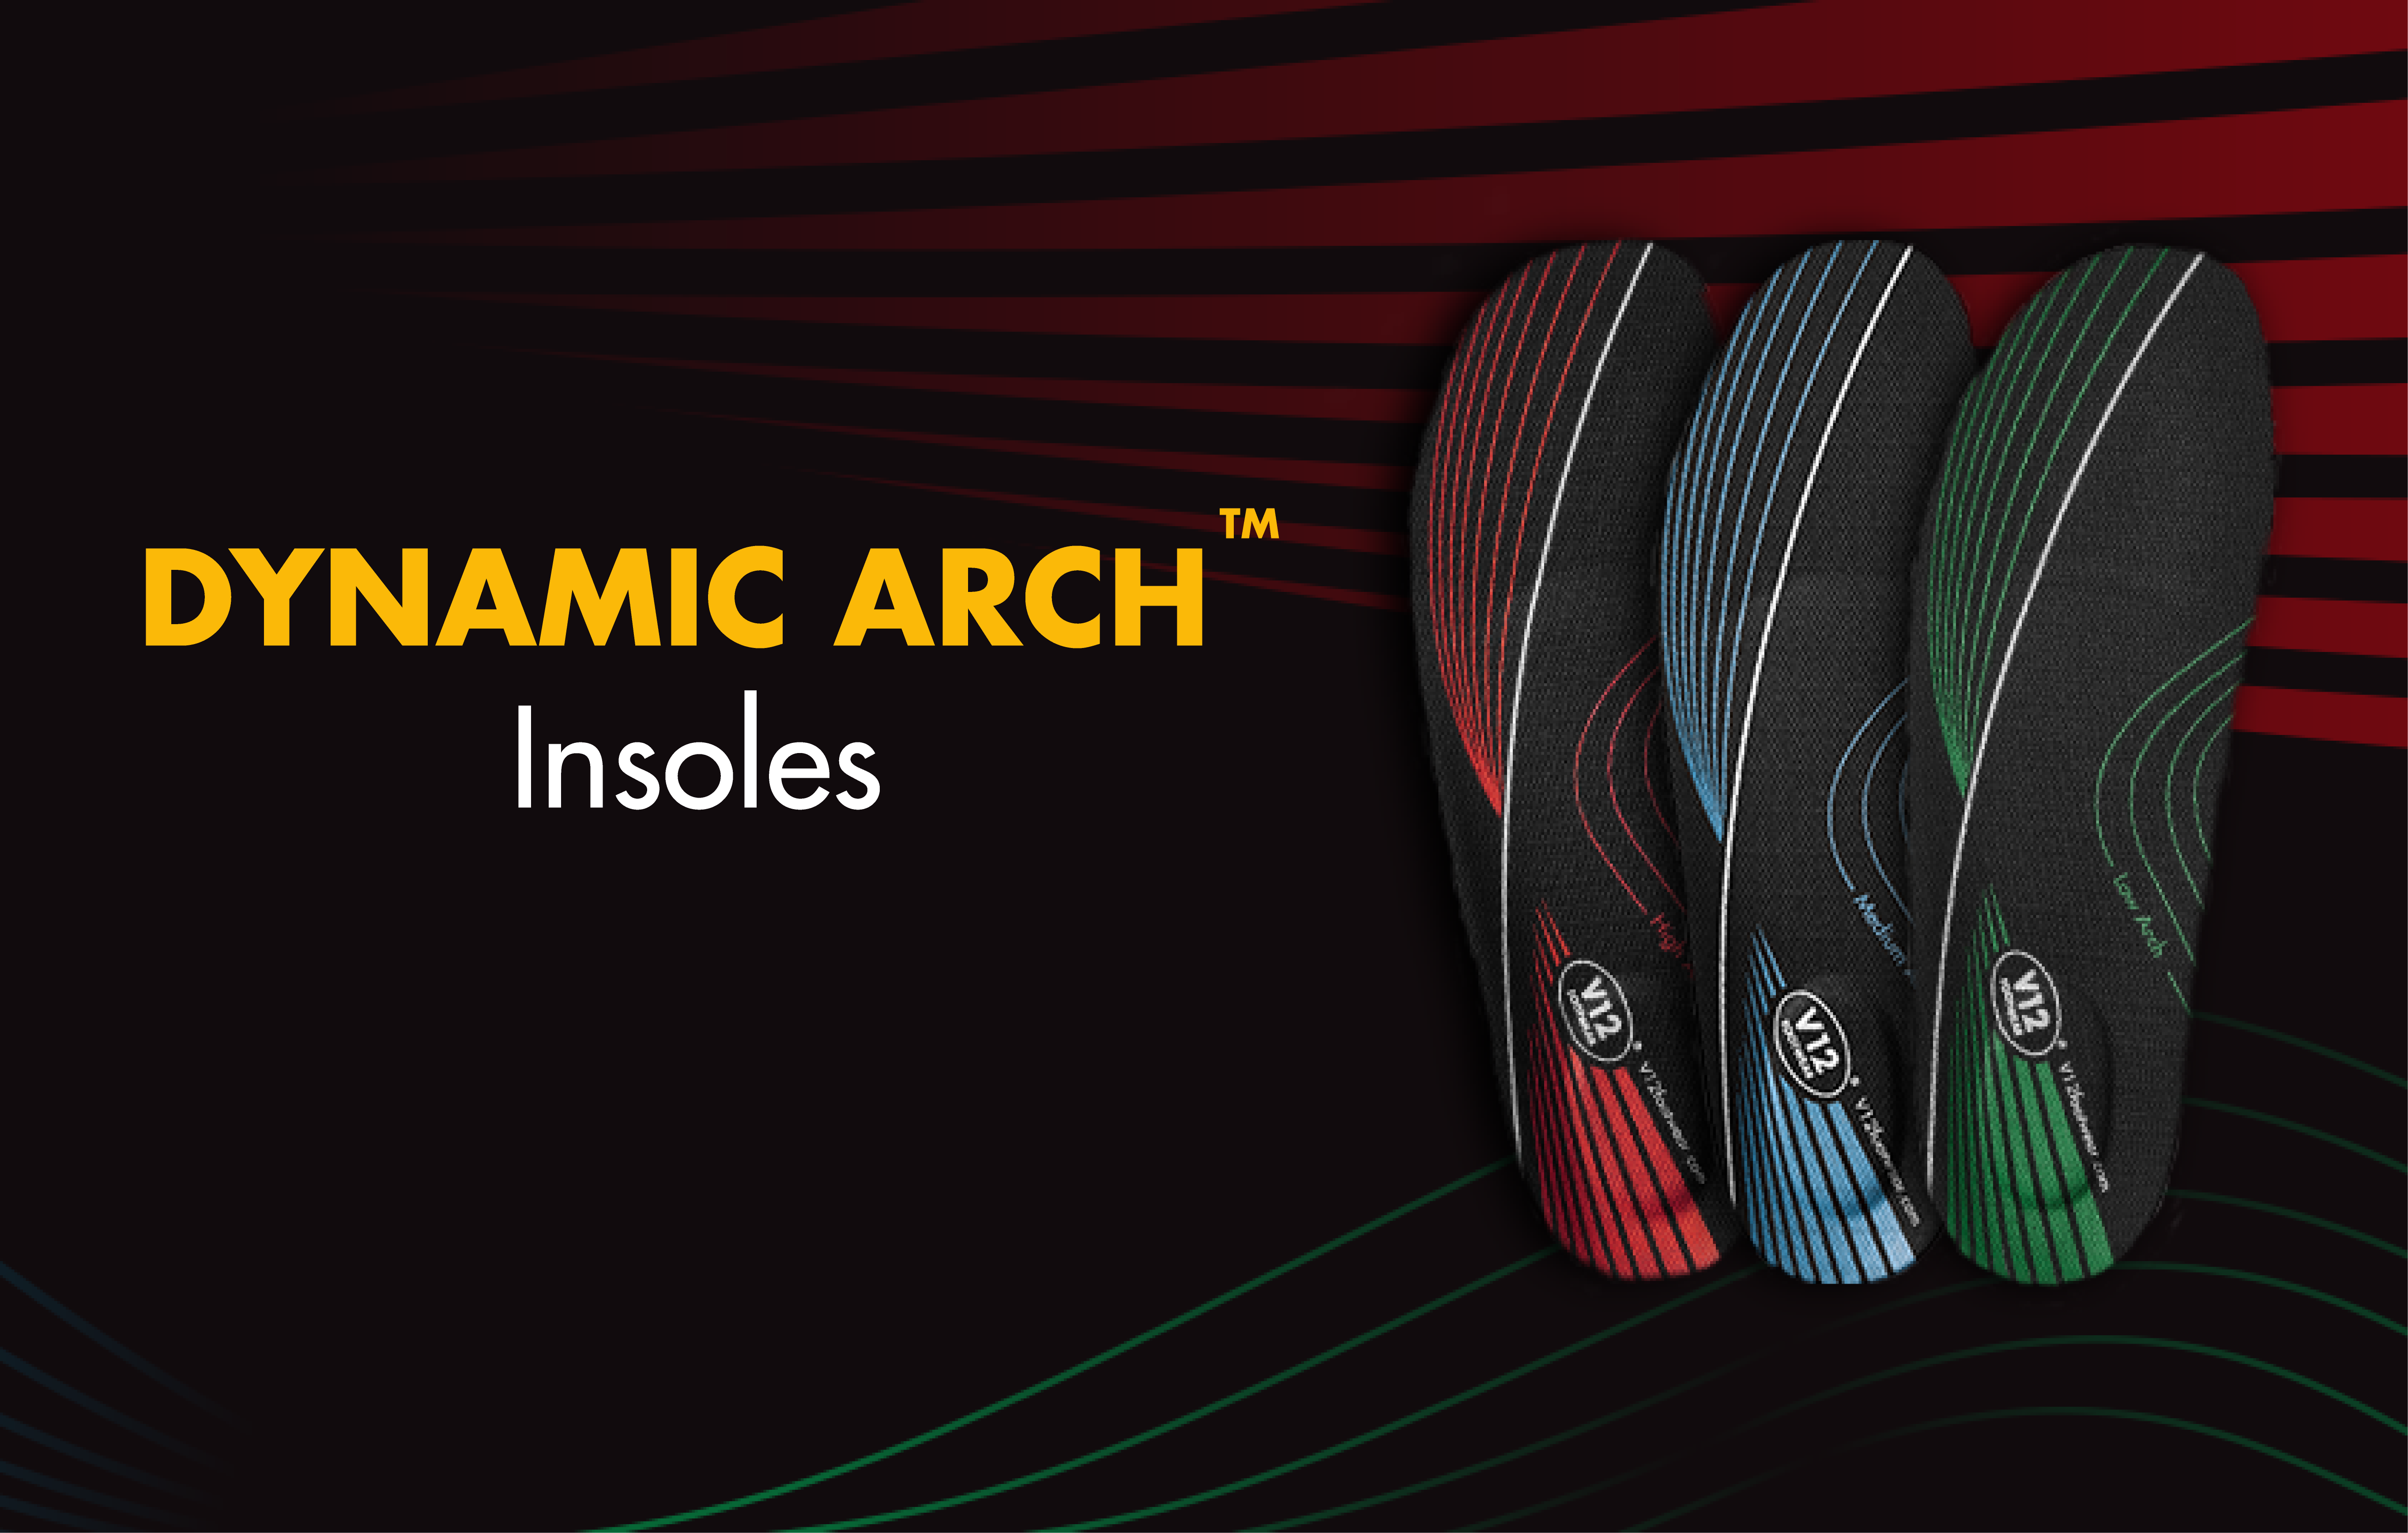 INTRODUCING OUR INNOVATIVE NEW INSOLES, THE DYNAMIC ARCH!